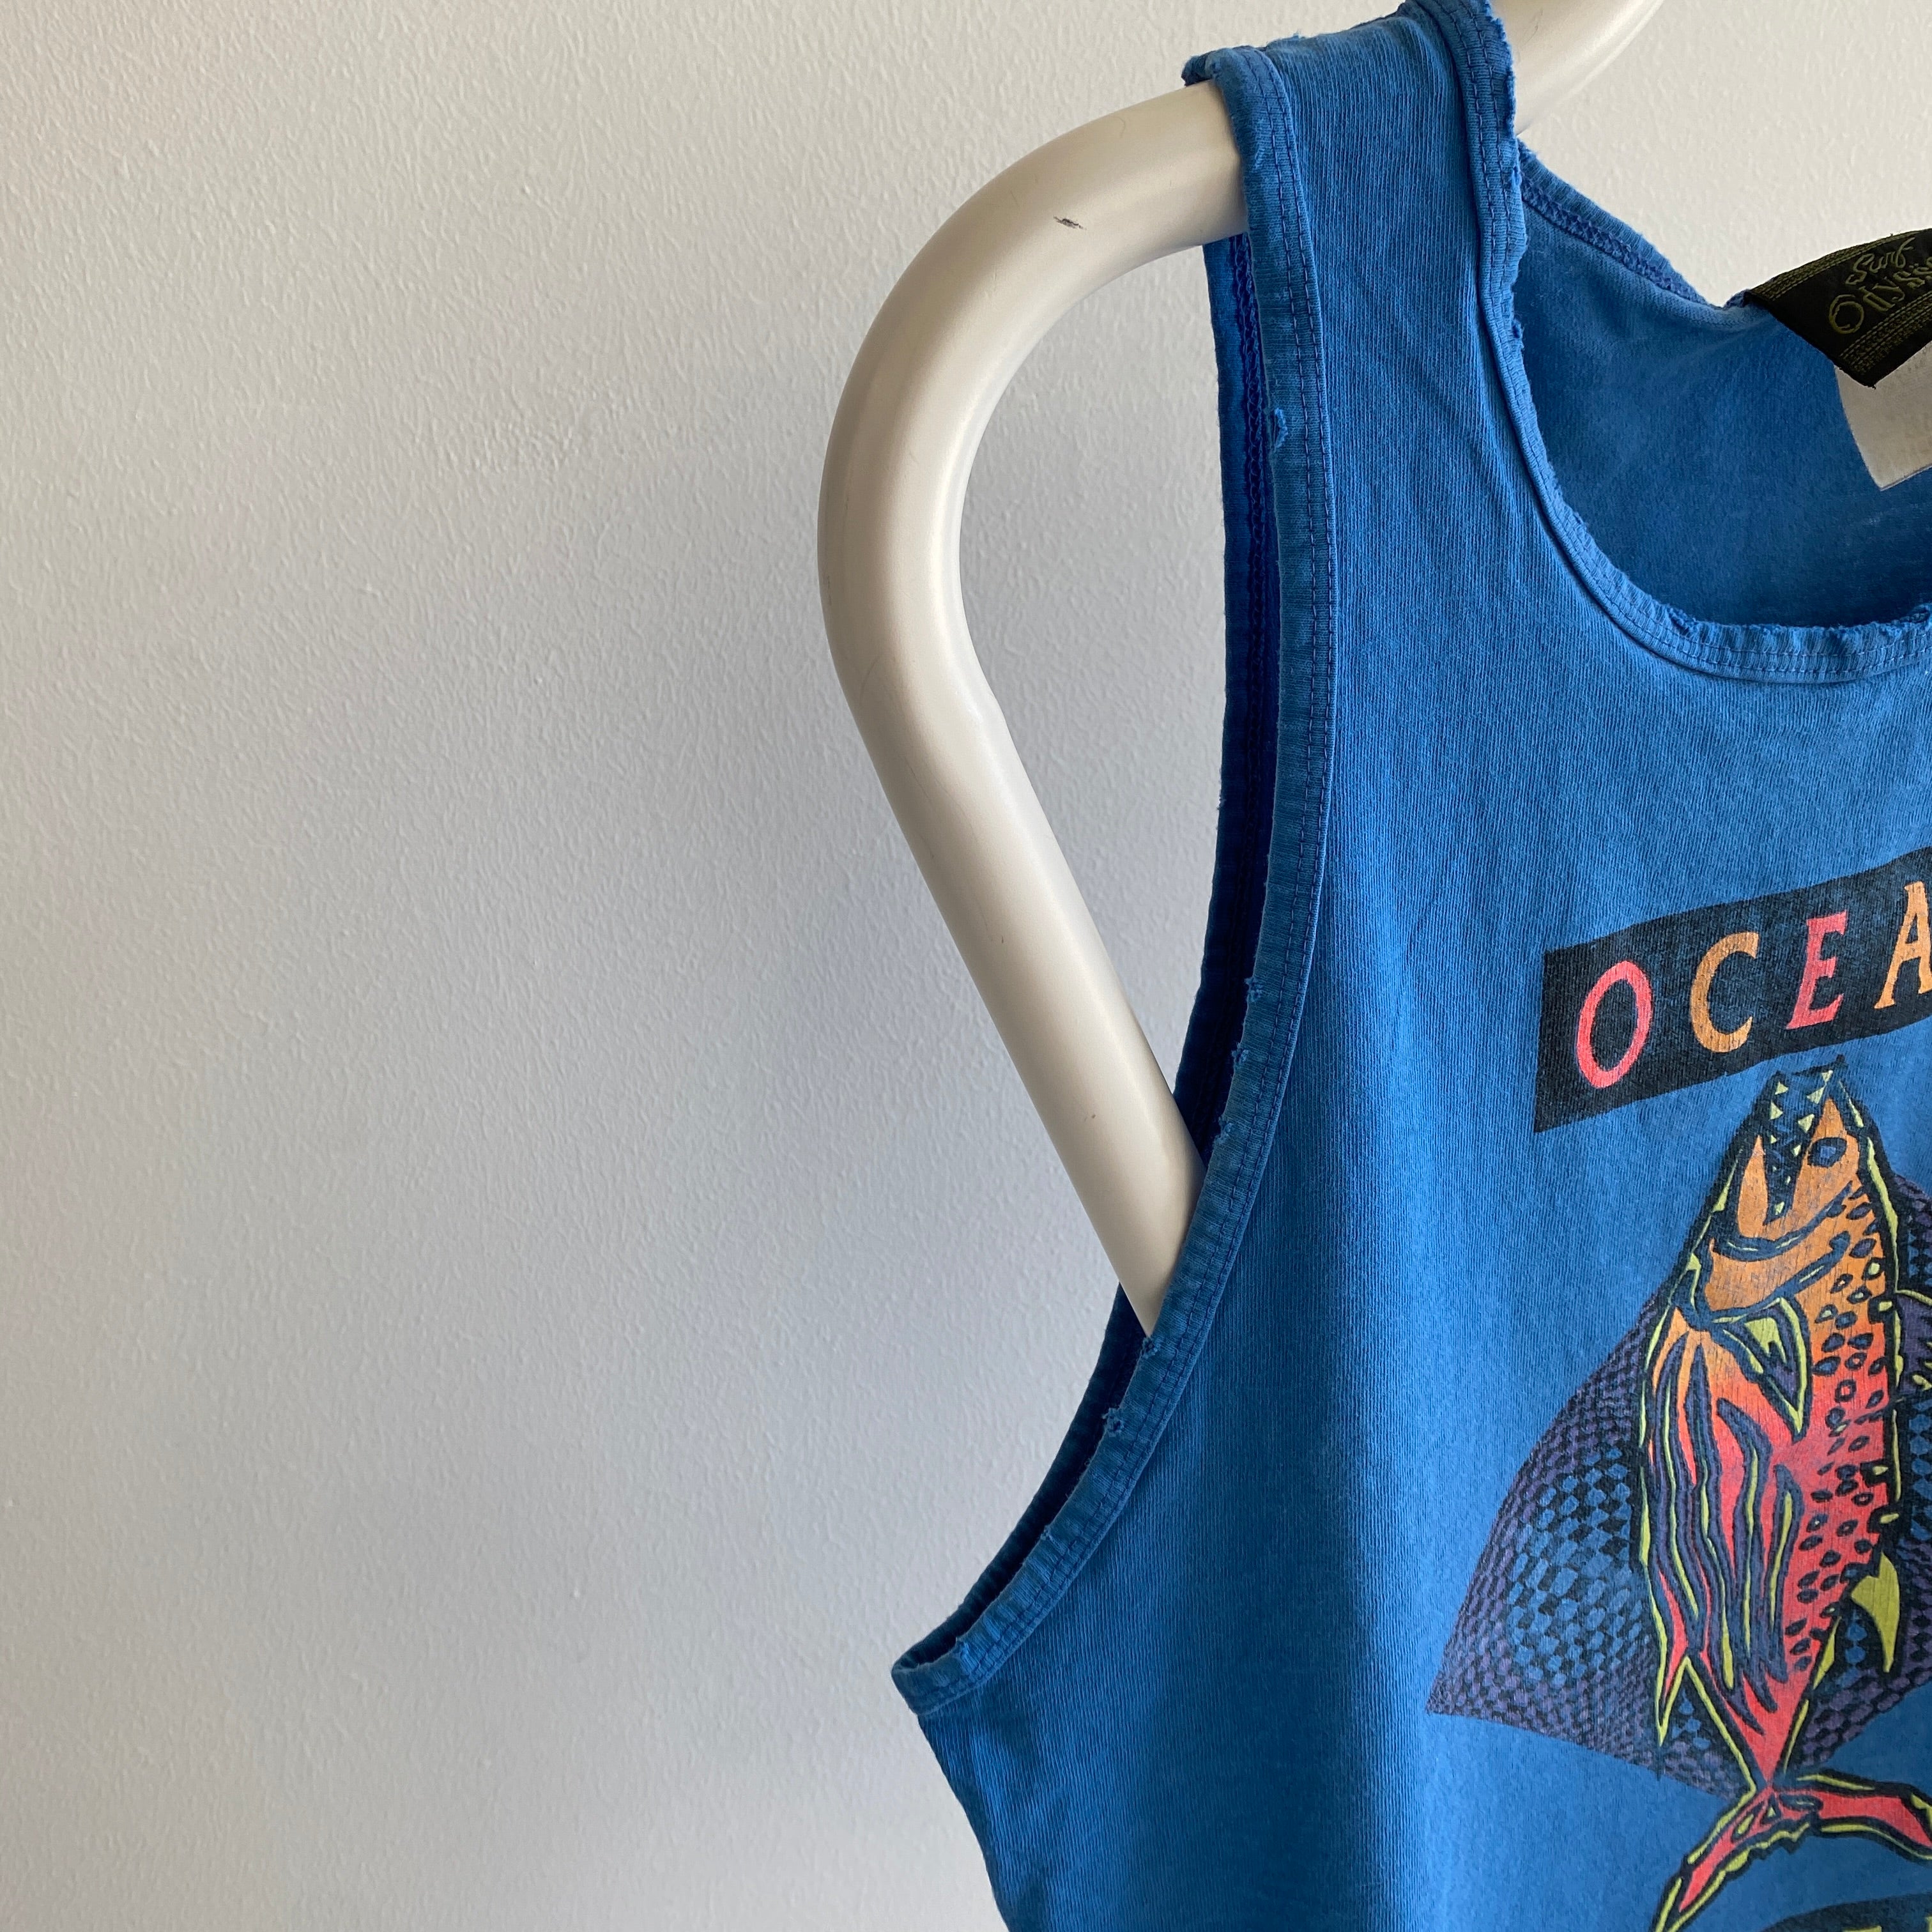 1980s Ocean Rippers Cotton Tank Top